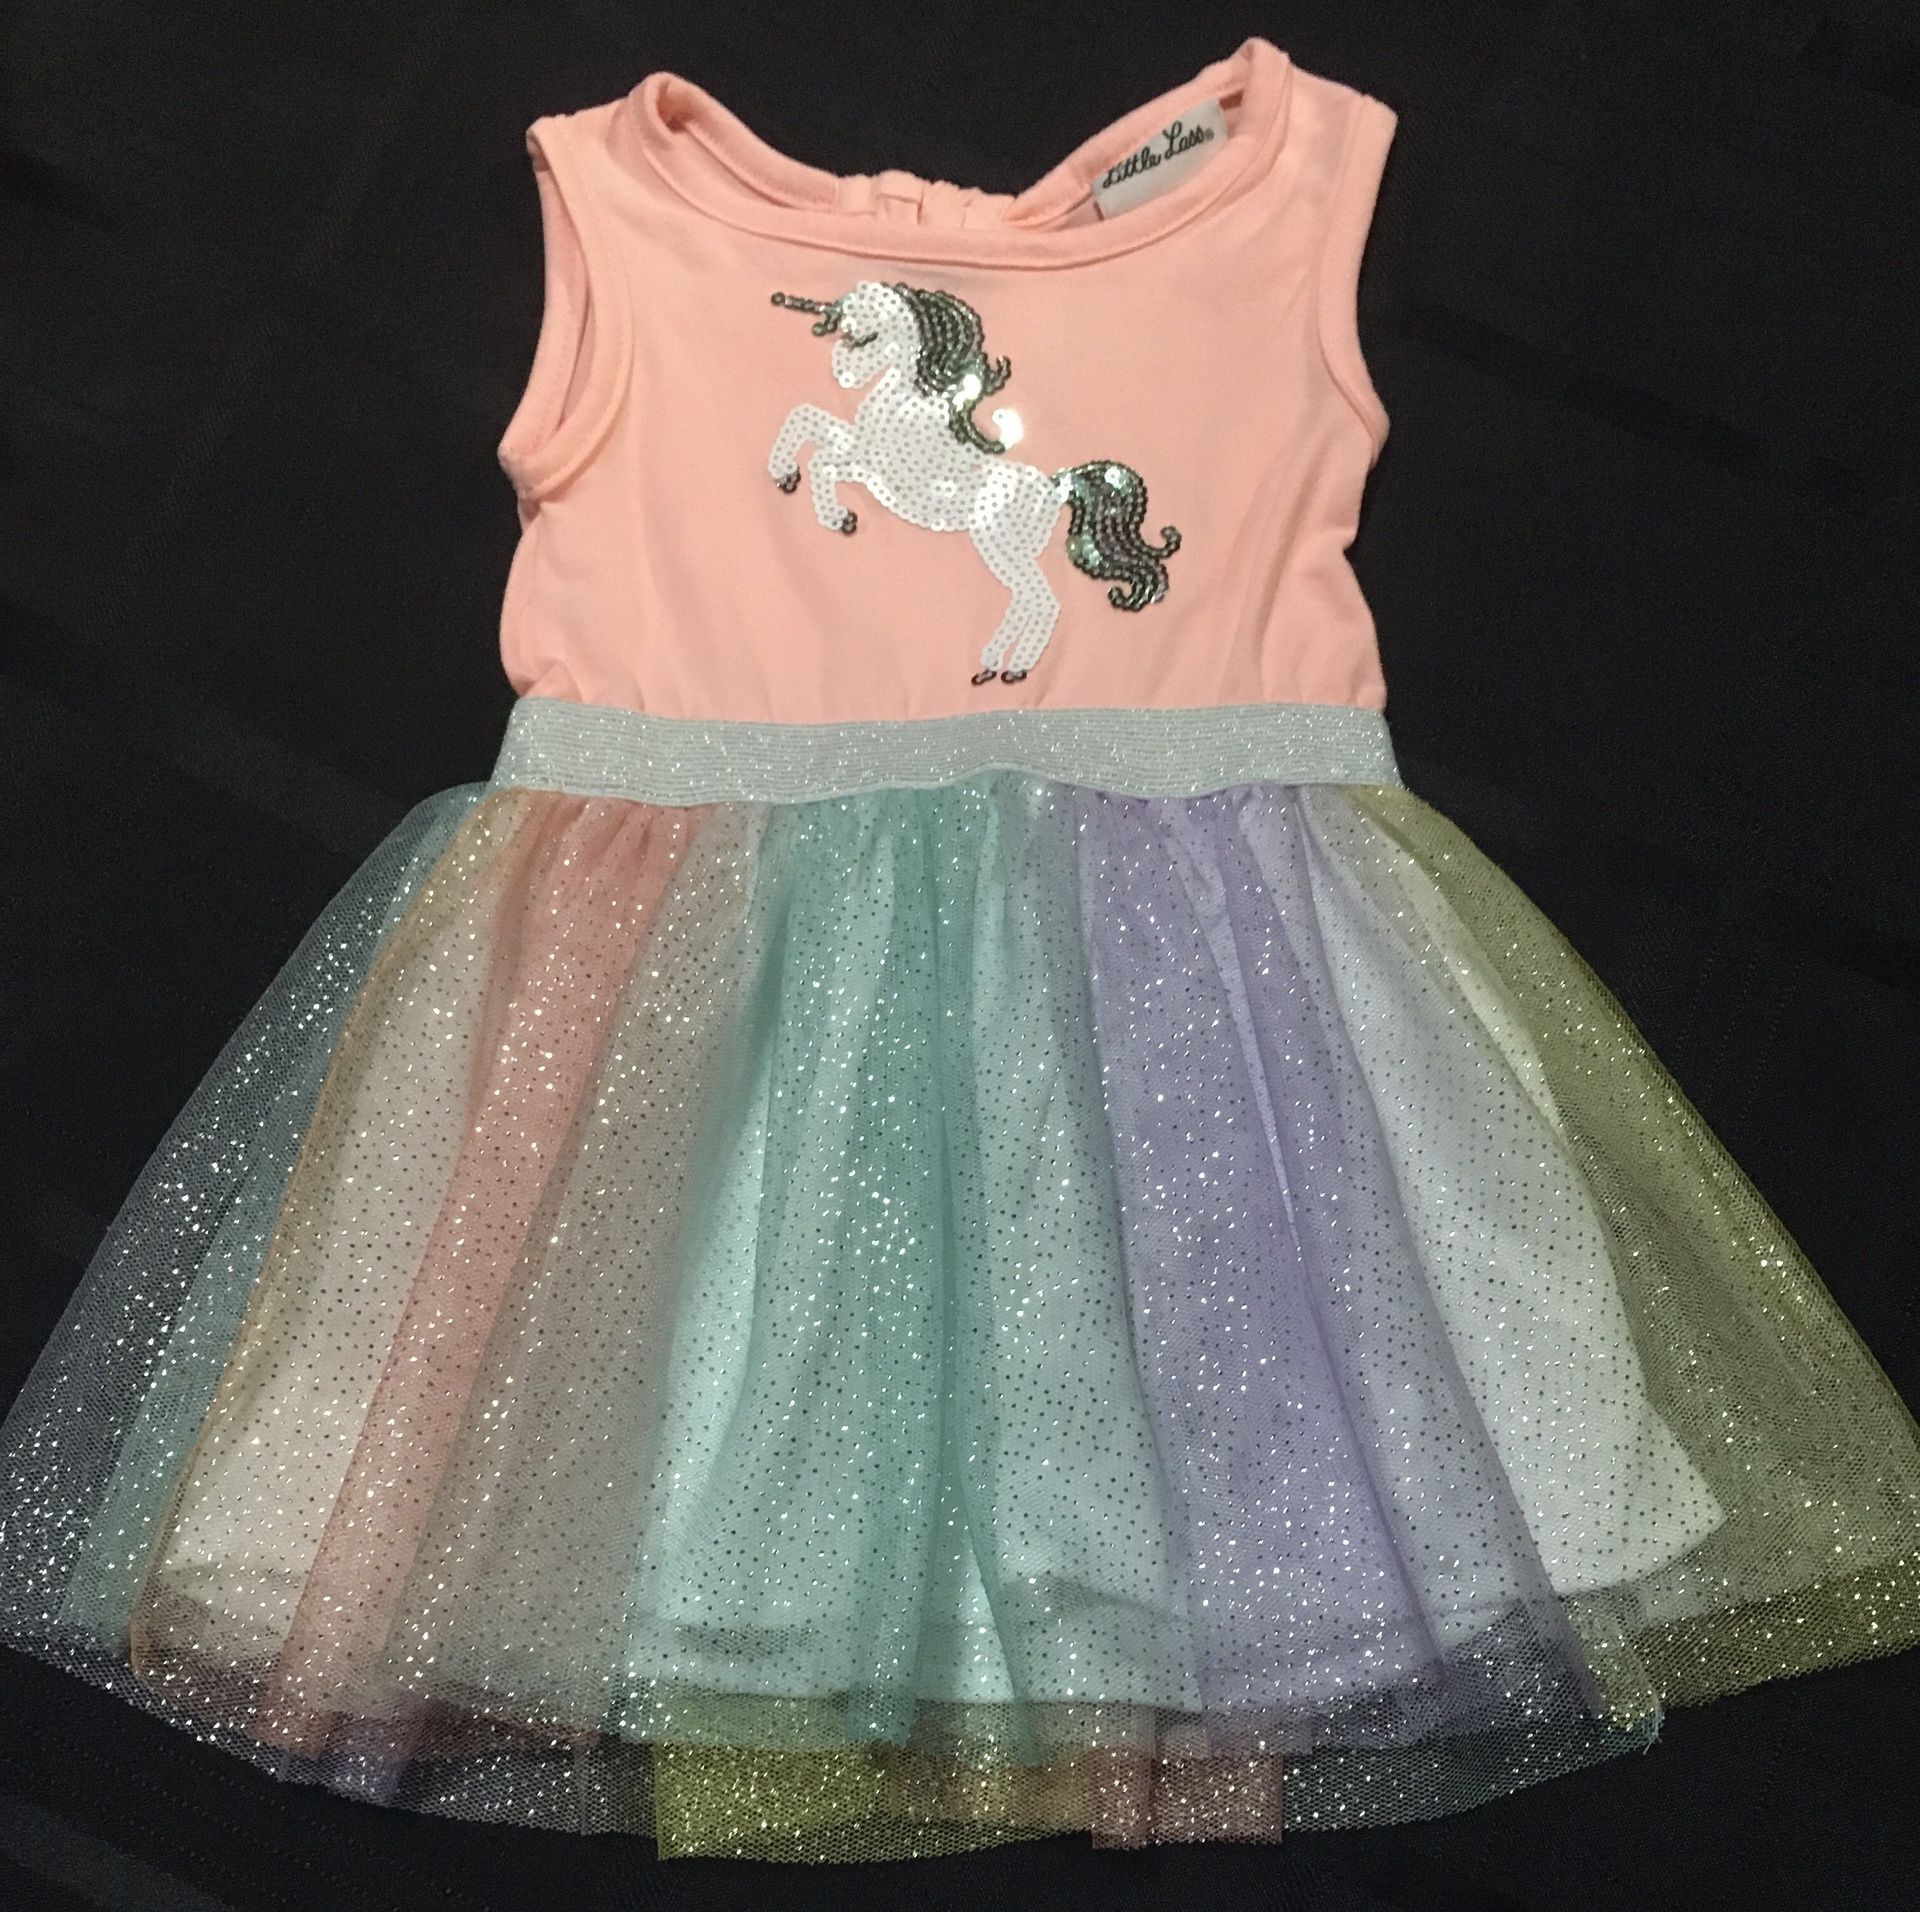 Little lass toddler girl size 12 month sequined unicorn sparkly tutu dress 